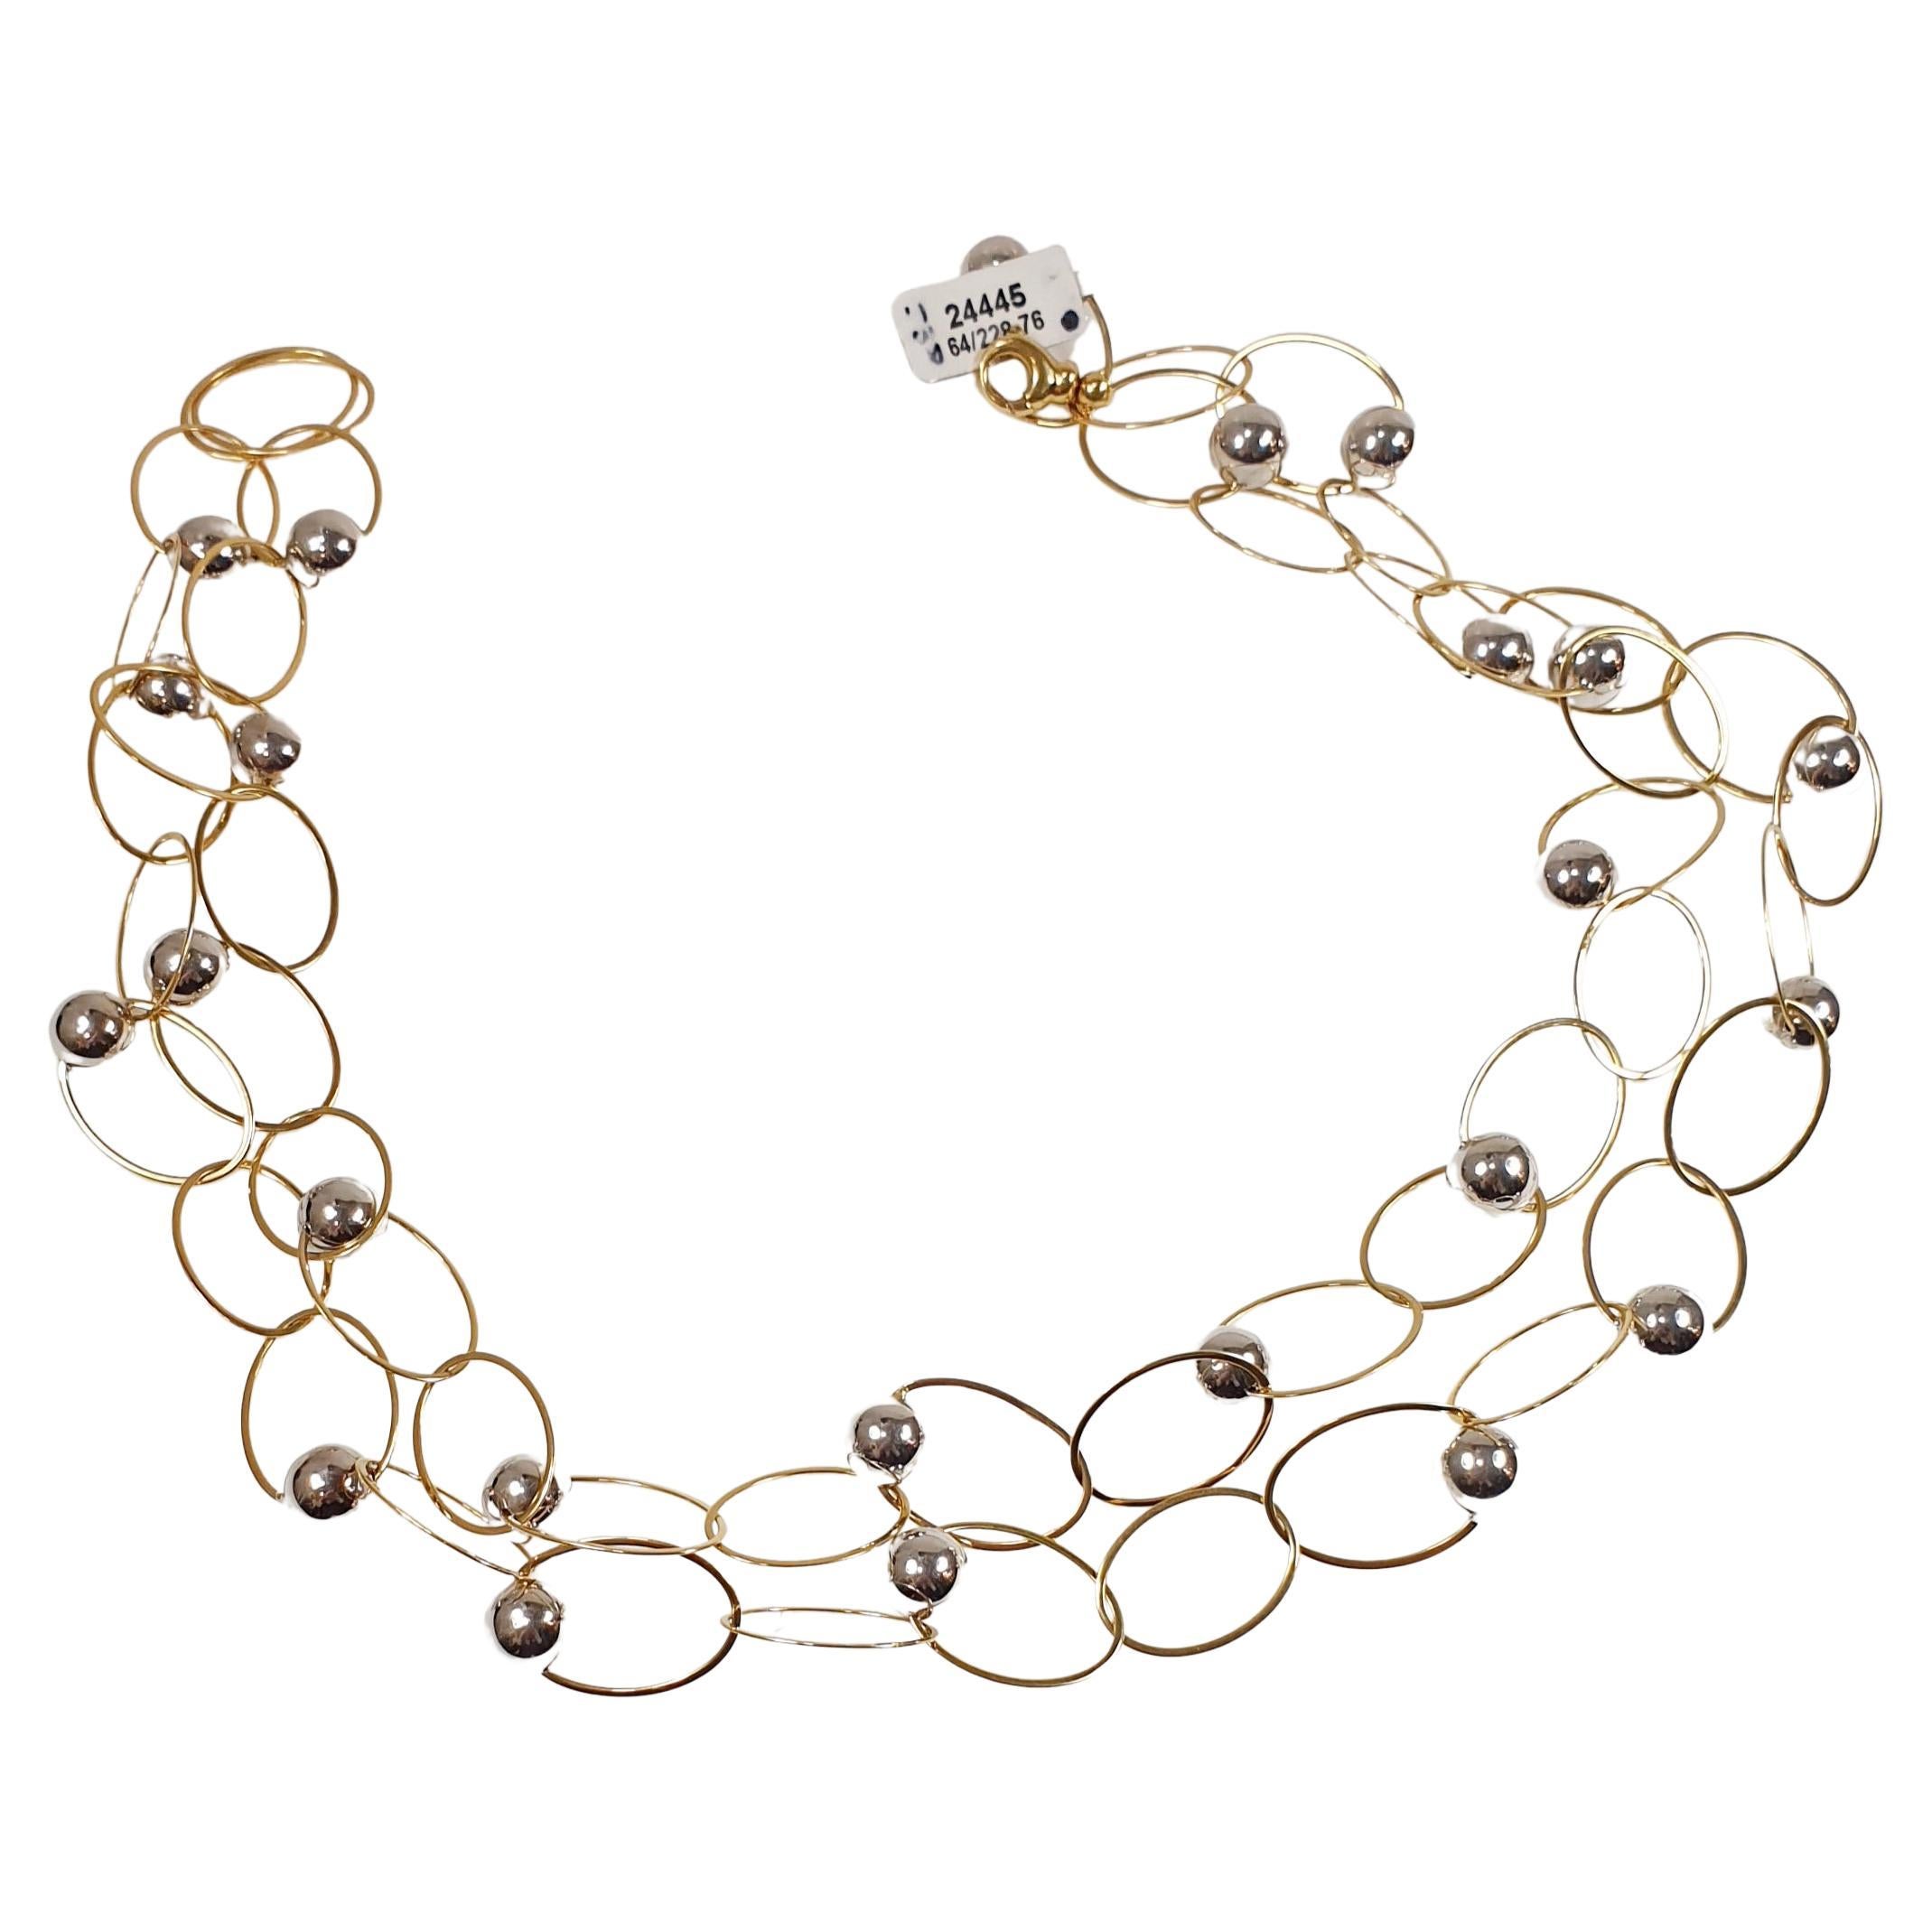 Two-Strand Necklace in Yellow Gold with White Gold Balls